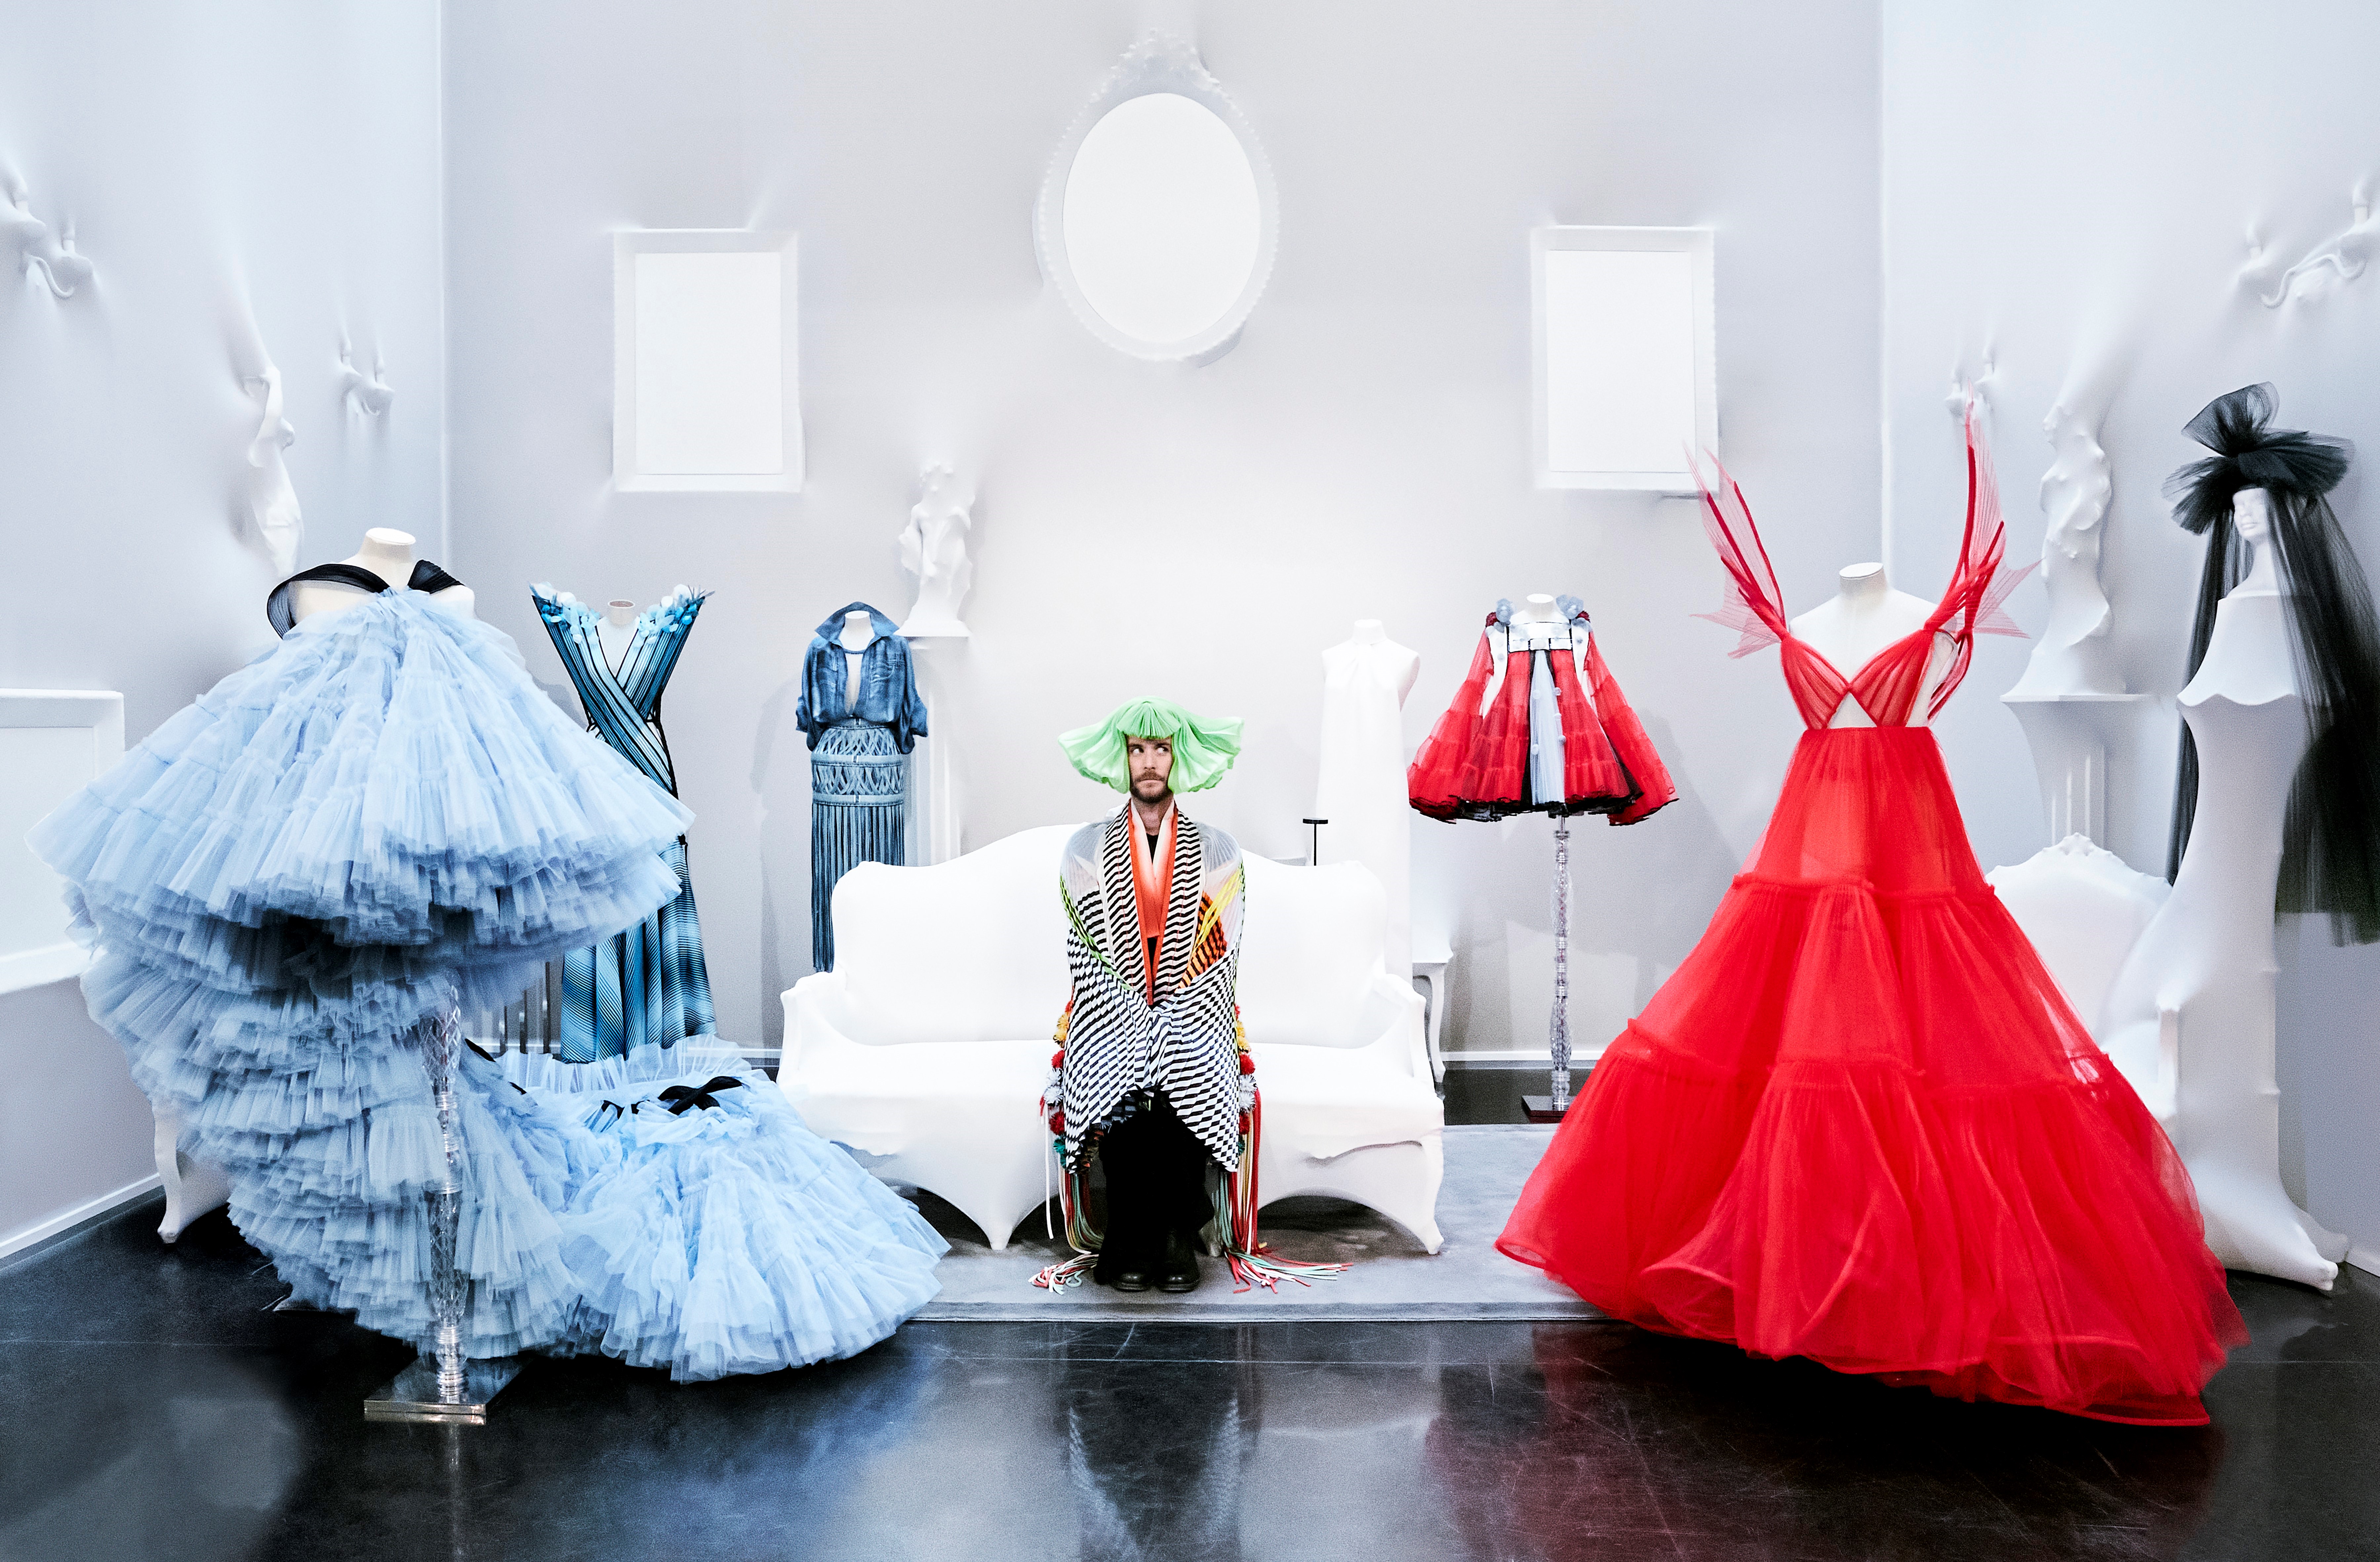 The Dress Makes the Man, Haute Couture – A New Era - Visit Stockholm